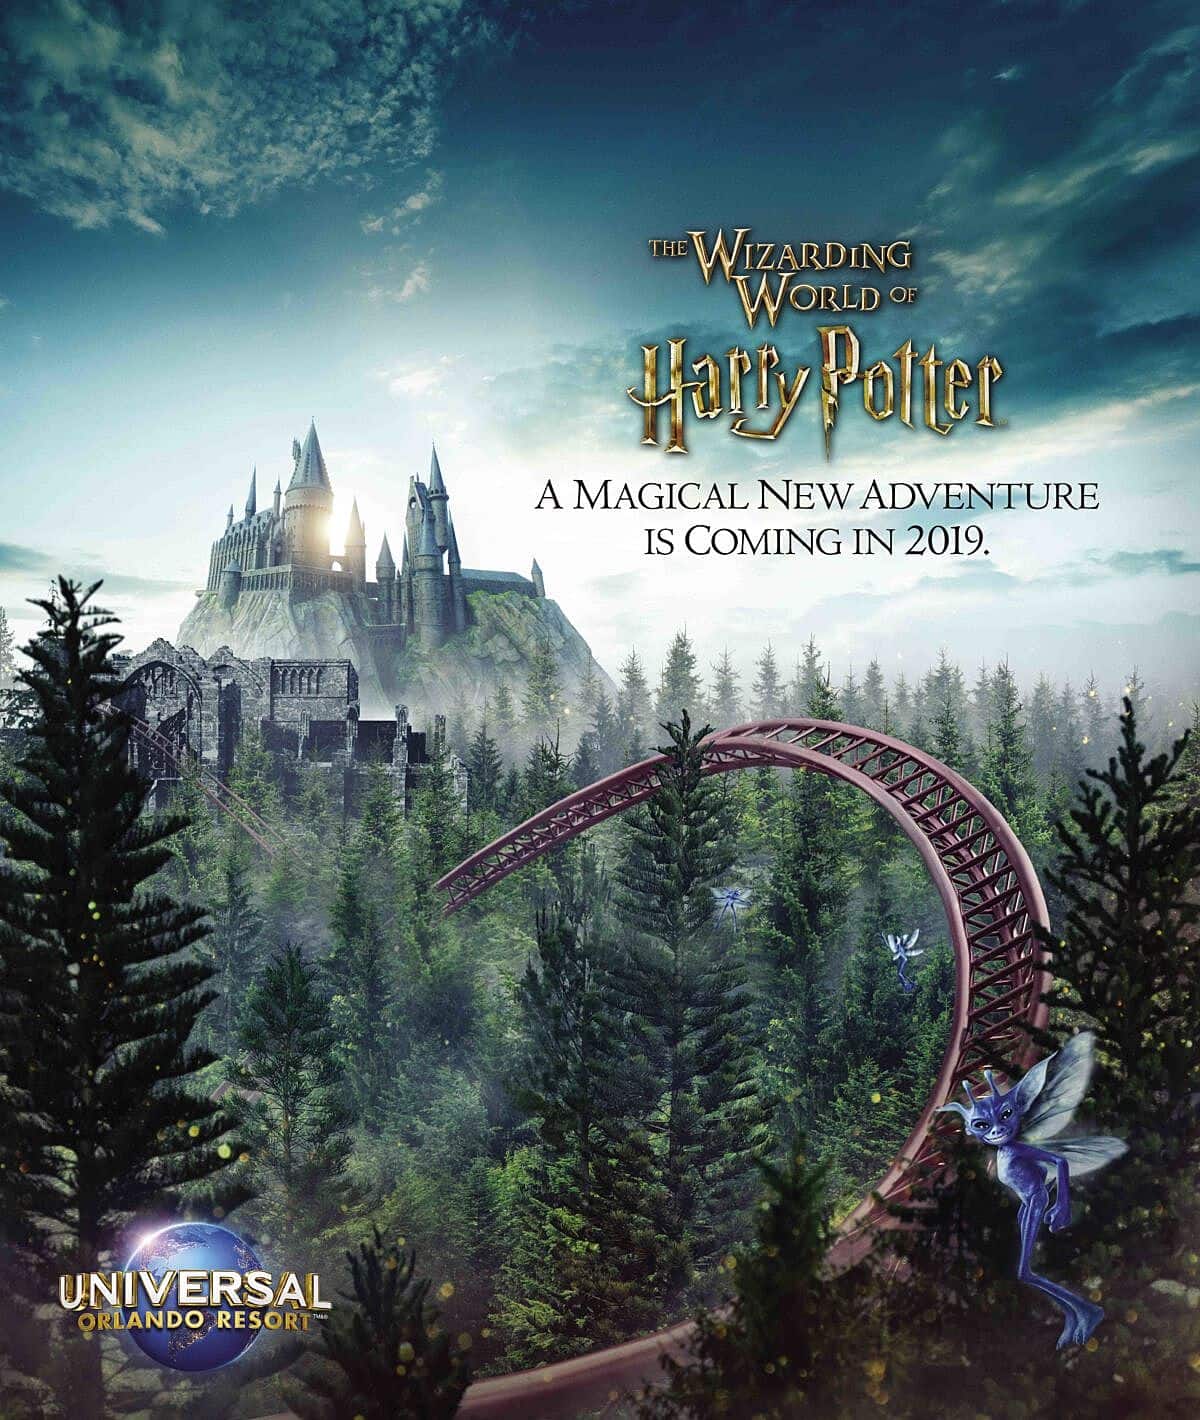 See the teaser image for the latest Wizarding World of Harry Potter coaster